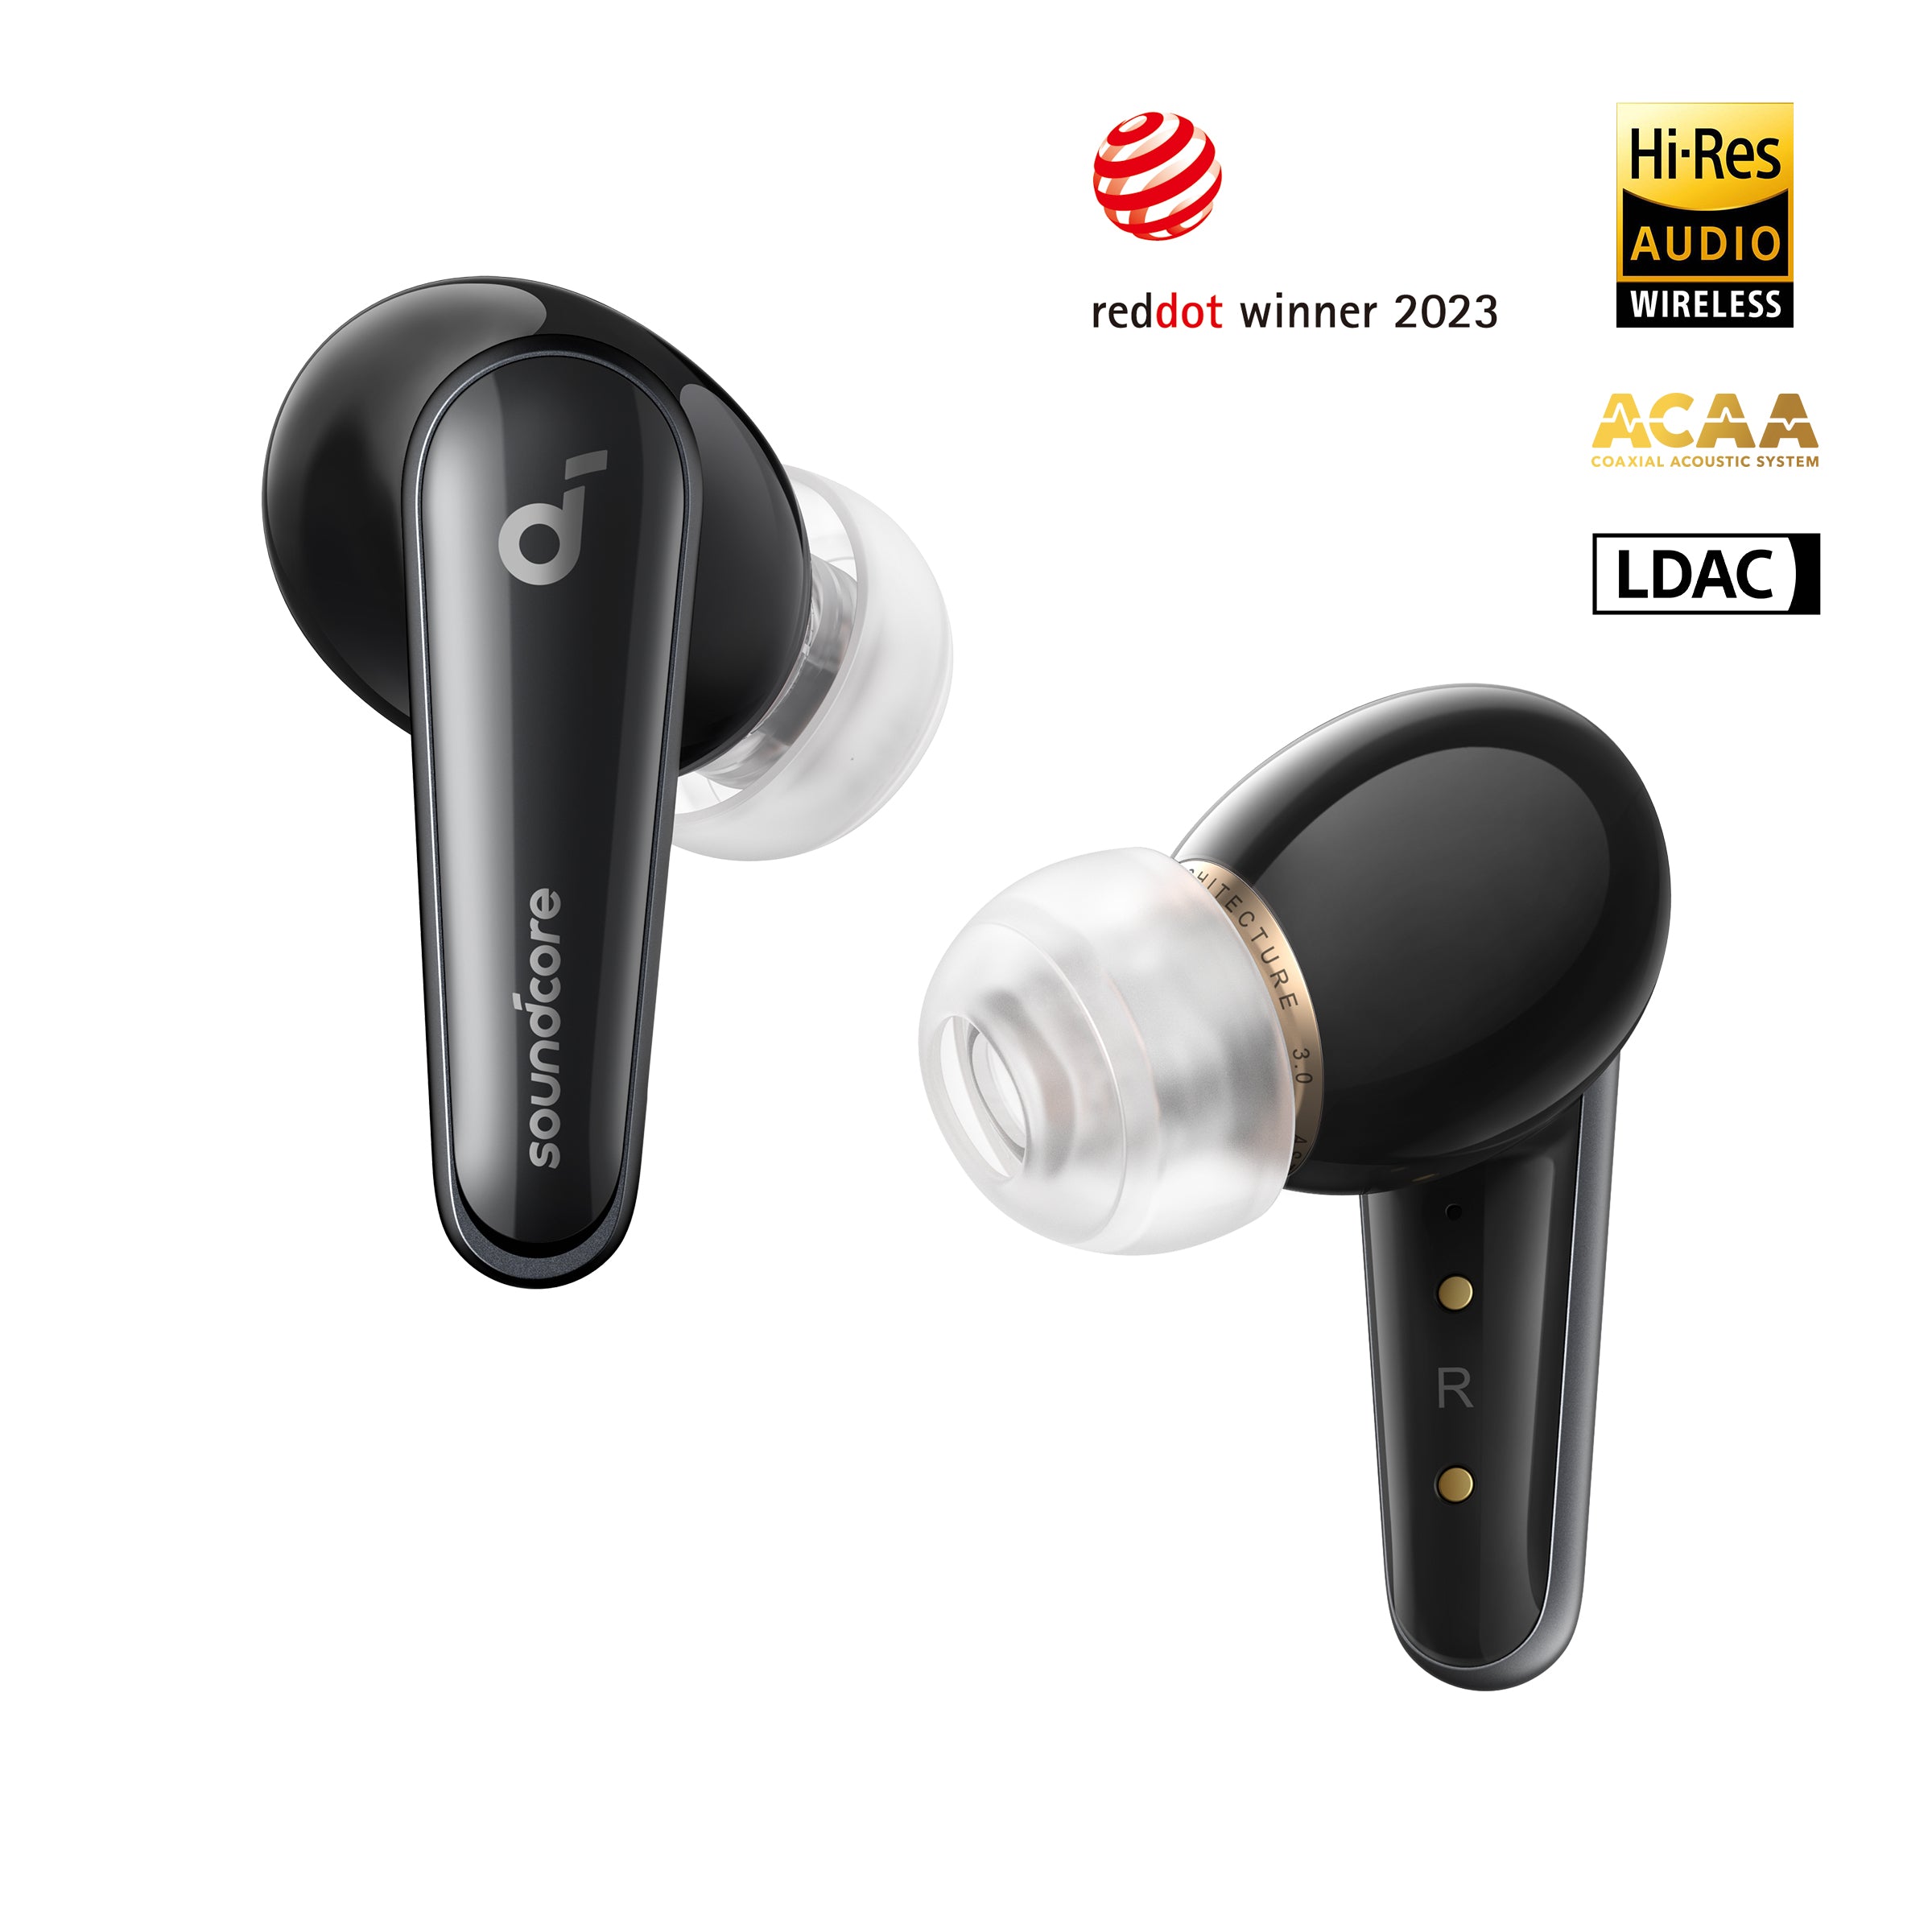 Liberty 4 NC - All-New True-Wireless Noise Canceling Earbuds 